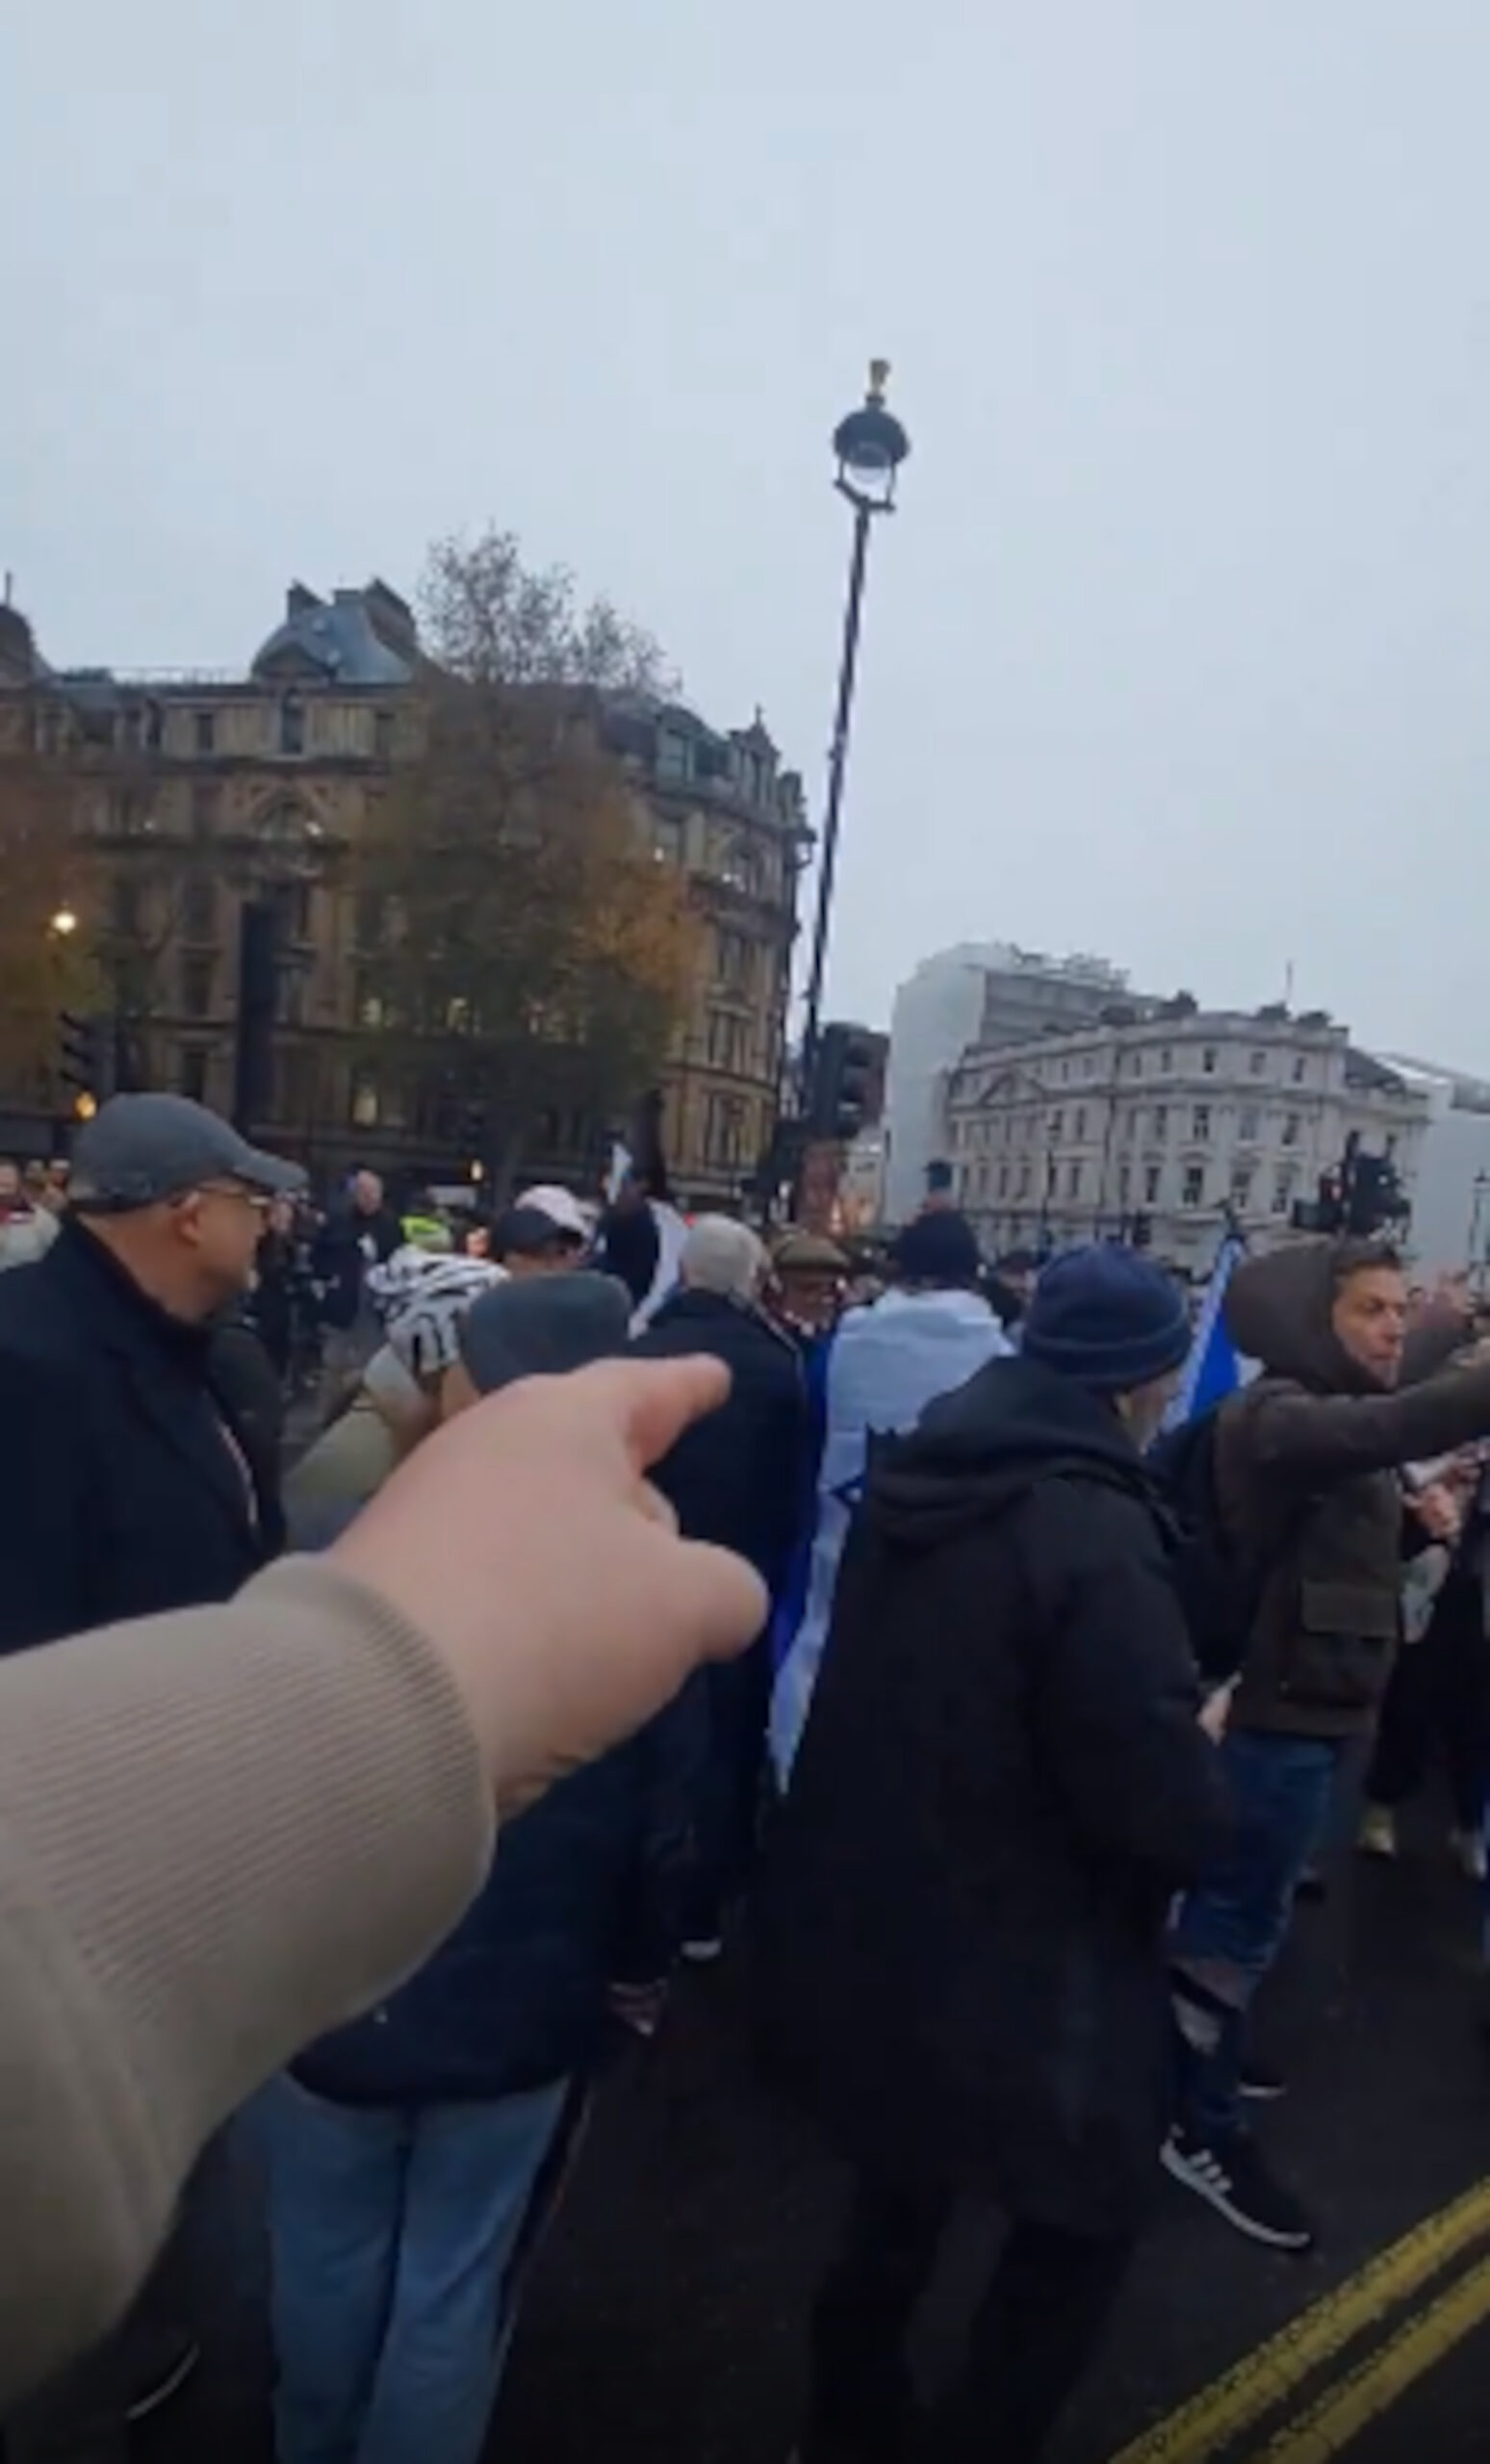 Stunning video reveals protesters at London march chanting “Nazi” phrase at anti-Zionist Jews